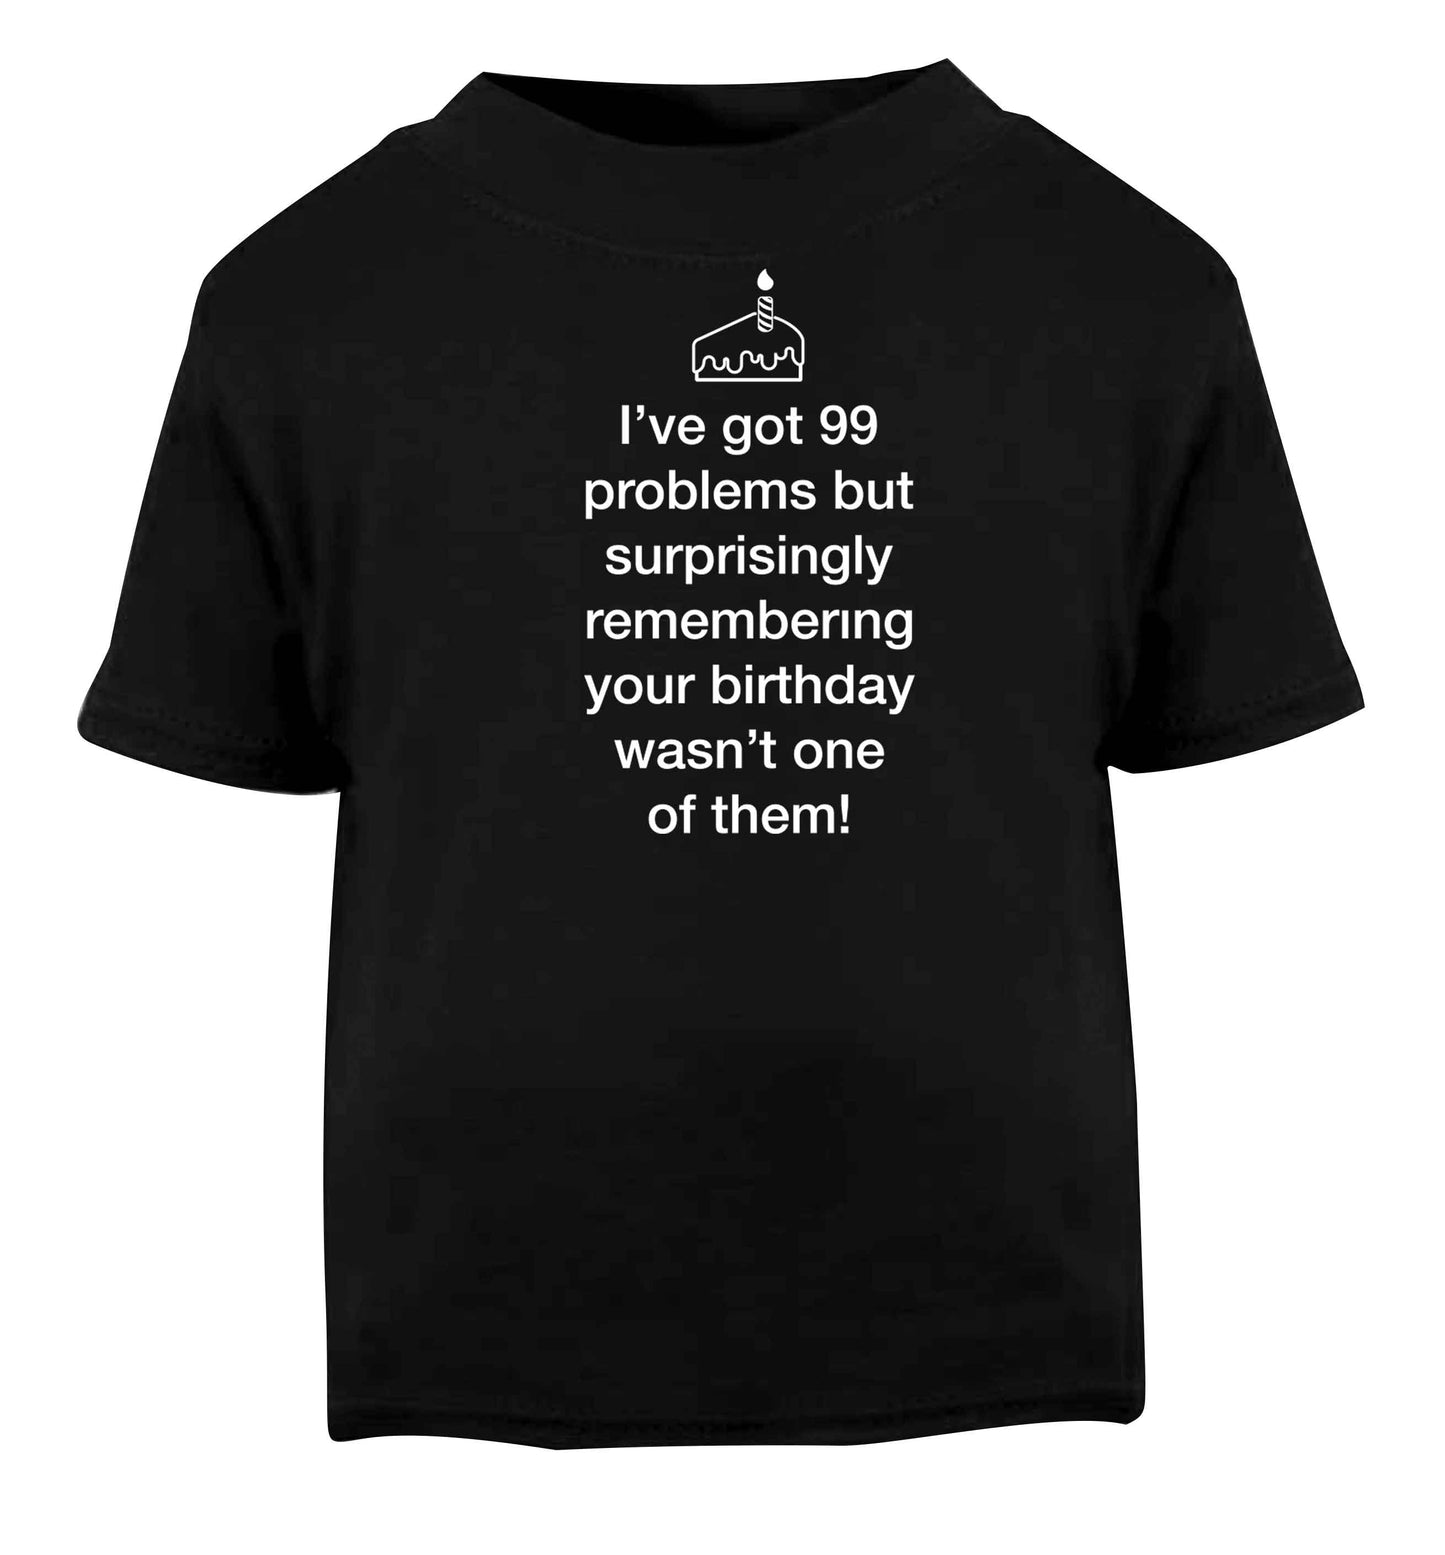 I've got 99 problems but surprisingly remembering your birthday wasn't one of them! Black baby toddler Tshirt 2 years